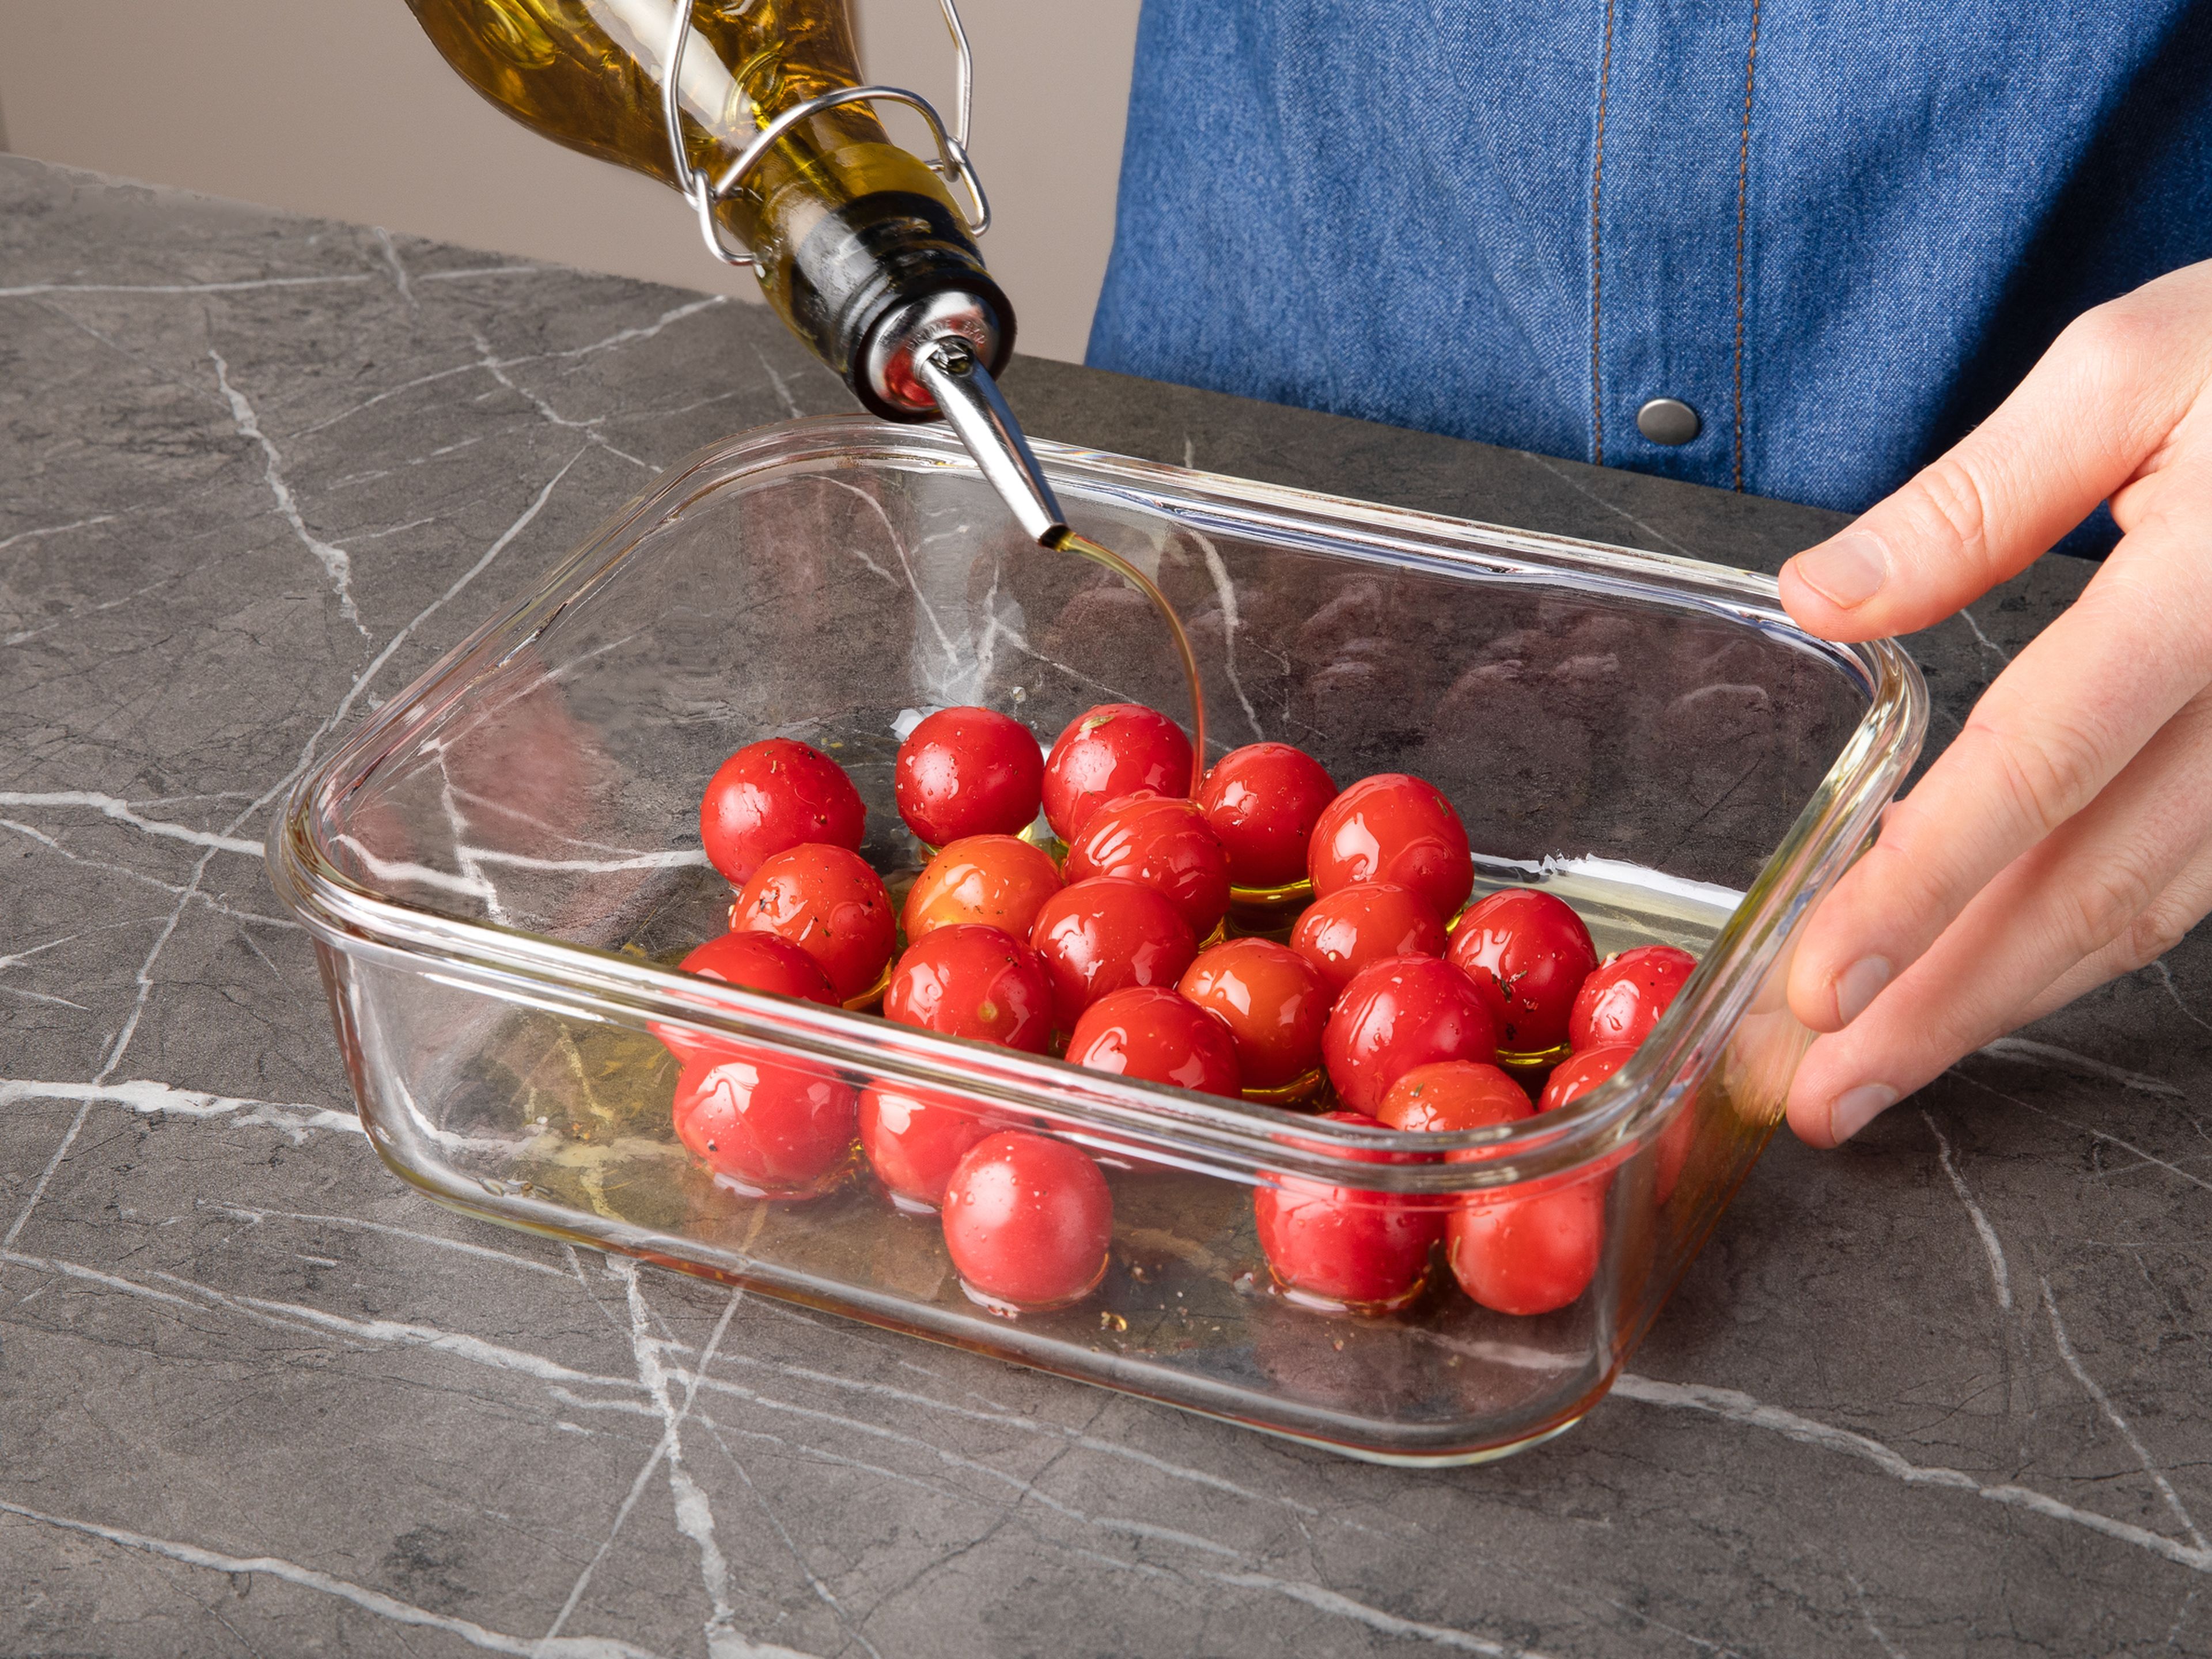 Preheat oven to 220°C/430°F. Place cherry tomatoes in a baking dish along with the olive oil, honey, and thyme sprigs. Toss well, season with salt and pepper, and transfer to the oven to bake for approx. 20 min. Peel and finely mince garlic. Chop basil into thin ribbons.